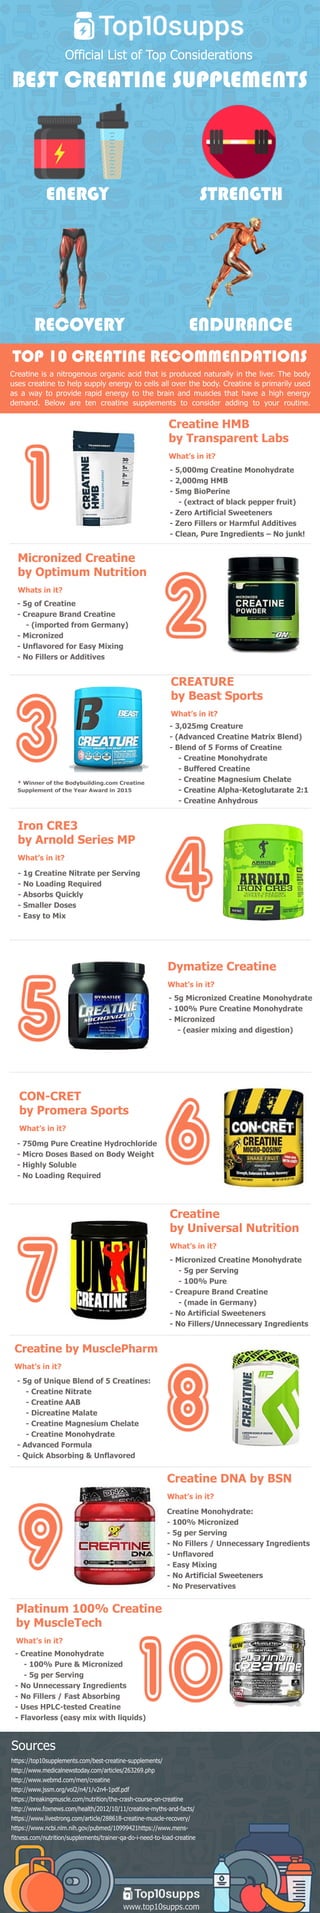 www.top10supps.com
https://top10supplements.com/best-creatine-supplements/
http://www.medicalnewstoday.com/articles/263269.php
http://www.webmd.com/men/creatine
http://www.jssm.org/vol2/n4/1/v2n4-1pdf.pdf
https://breakingmuscle.com/nutrition/the-crash-course-on-creatine
http://www.foxnews.com/health/2012/10/11/creatine-myths-and-facts/
hhttps://www.livestrong.com/article/288618-creatine-muscle-recovery/
https://www.ncbi.nlm.nih.gov/pubmed/10999421https://www.mens-
fitness.com/nutrition/supplements/trainer-qa-do-i-need-to-load-creatine
Sources
Creatineisanitrogenousorganicacidthatisproducednaturallyintheliver.Thebody
usescreatinetohelpsupplyenergytocellsalloverthebody.Creatineisprimarilyused
asawaytoproviderapidenergytothebrainandmusclesthathaveahighenergy
demand.Below areten creatinesupplementstoconsideradding toyourroutine.
TOP10CREATINERECOMMENDATIONS
*WinneroftheBodybuilding.com Creatine
SupplementoftheYearAwardin2015
-CreatineMonohydrate
-100% Pure&Micronized
-5gperServing
-NoUnnecessaryIngredients
-NoFillers/FastAbsorbing
-UsesHPLC-testedCreatine
-Flavorless(easymixwithliquids)-Flavorless(easymixwithliquids)
Platinum 100% Creatine
byMuscleTech
What’sinit?
CreatineMonohydrate:
-100% Micronized
-5gperServing
-NoFillers/UnnecessaryIngredients
-Unflavored
-EasyMixing
-NoArtificialSweeteners-NoArtificialSweeteners
-NoPreservatives
CreatineDNAbyBSN
What’sinit?
-5gofUniqueBlendof5Creatines:
-CreatineNitrate
-CreatineAAB
-DicreatineMalate
-CreatineMagnesium Chelate
-CreatineMonohydrate
-AdvancedFormula-AdvancedFormula
-QuickAbsorbing&Unflavored
CreatinebyMusclePharm
What’sinit?
-MicronizedCreatineMonohydrate
-5gperServing
-100% Pure
-CreapureBrandCreatine
-(madeinGermany)
-NoArtificialSweeteners
-NoFillers/UnnecessaryIngredients-NoFillers/UnnecessaryIngredients
Creatine
byUniversalNutrition
What’sinit?
-750mgPureCreatineHydrochloride
-MicroDosesBasedonBodyWeight
-HighlySoluble
-NoLoadingRequired
CON-CRET
byPromeraSports
What’sinit?
-5gMicronizedCreatineMonohydrate
-100% PureCreatineMonohydrate
-Micronized
-(easiermixinganddigestion)
DymatizeCreatine
What’sinit?
-1gCreatineNitrateperServing
-NoLoadingRequired
-AbsorbsQuickly
-SmallerDoses
-EasytoMix
IronCRE3
byArnoldSeriesMP
What’sinit?
-3,025mgCreature
-(AdvancedCreatineMatrixBlend)
-Blendof5FormsofCreatine
-CreatineMonohydrate
-BufferedCreatine
-CreatineMagnesium Chelate
-CreatineAlpha-Ketoglutarate2:1-CreatineAlpha-Ketoglutarate2:1
-CreatineAnhydrous
CREATURE
byBeastSports
What’sinit?
-5gofCreatine
-CreapureBrandCreatine
-(importedfrom Germany)
-Micronized
-UnflavoredforEasyMixing
-NoFillersorAdditives
MicronizedCreatine
byOptimum Nutrition
Whatsinit?
-5,000mgCreatineMonohydrate
-2,000mgHMB
-5mgBioPerine
-(extractofblackpepperfruit)
-ZeroArtificialSweeteners
-ZeroFillersorHarmfulAdditives
-Clean,PureIngredients–Nojunk!-Clean,PureIngredients–Nojunk!
CreatineHMB
byTransparentLabs
What’sinit?
RECOVERY
ENERGY STRENGTH
ENDURANCE
BESTCREATINESUPPLEMENTS
OfficialListofTopConsiderations
 